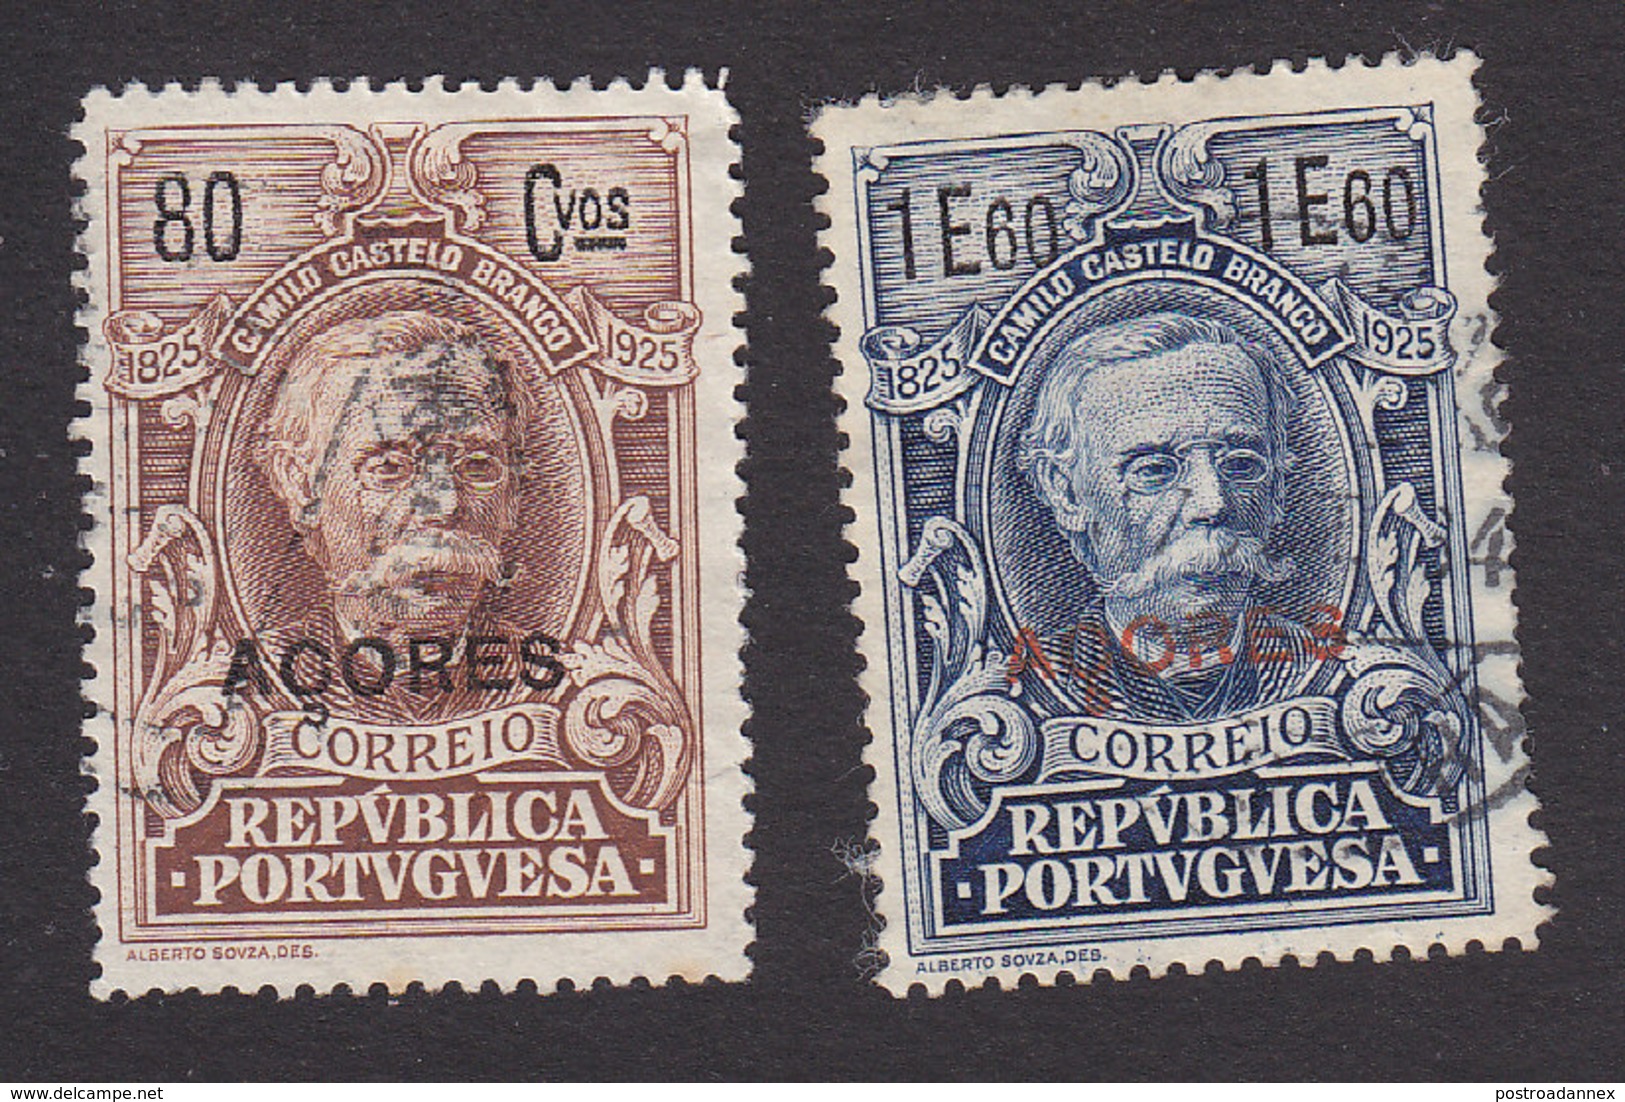 Azores, Scott #251, 253, Used, Centenary Of Birth Of Castello-Branco Overprinted, Issued 1925 - Azores